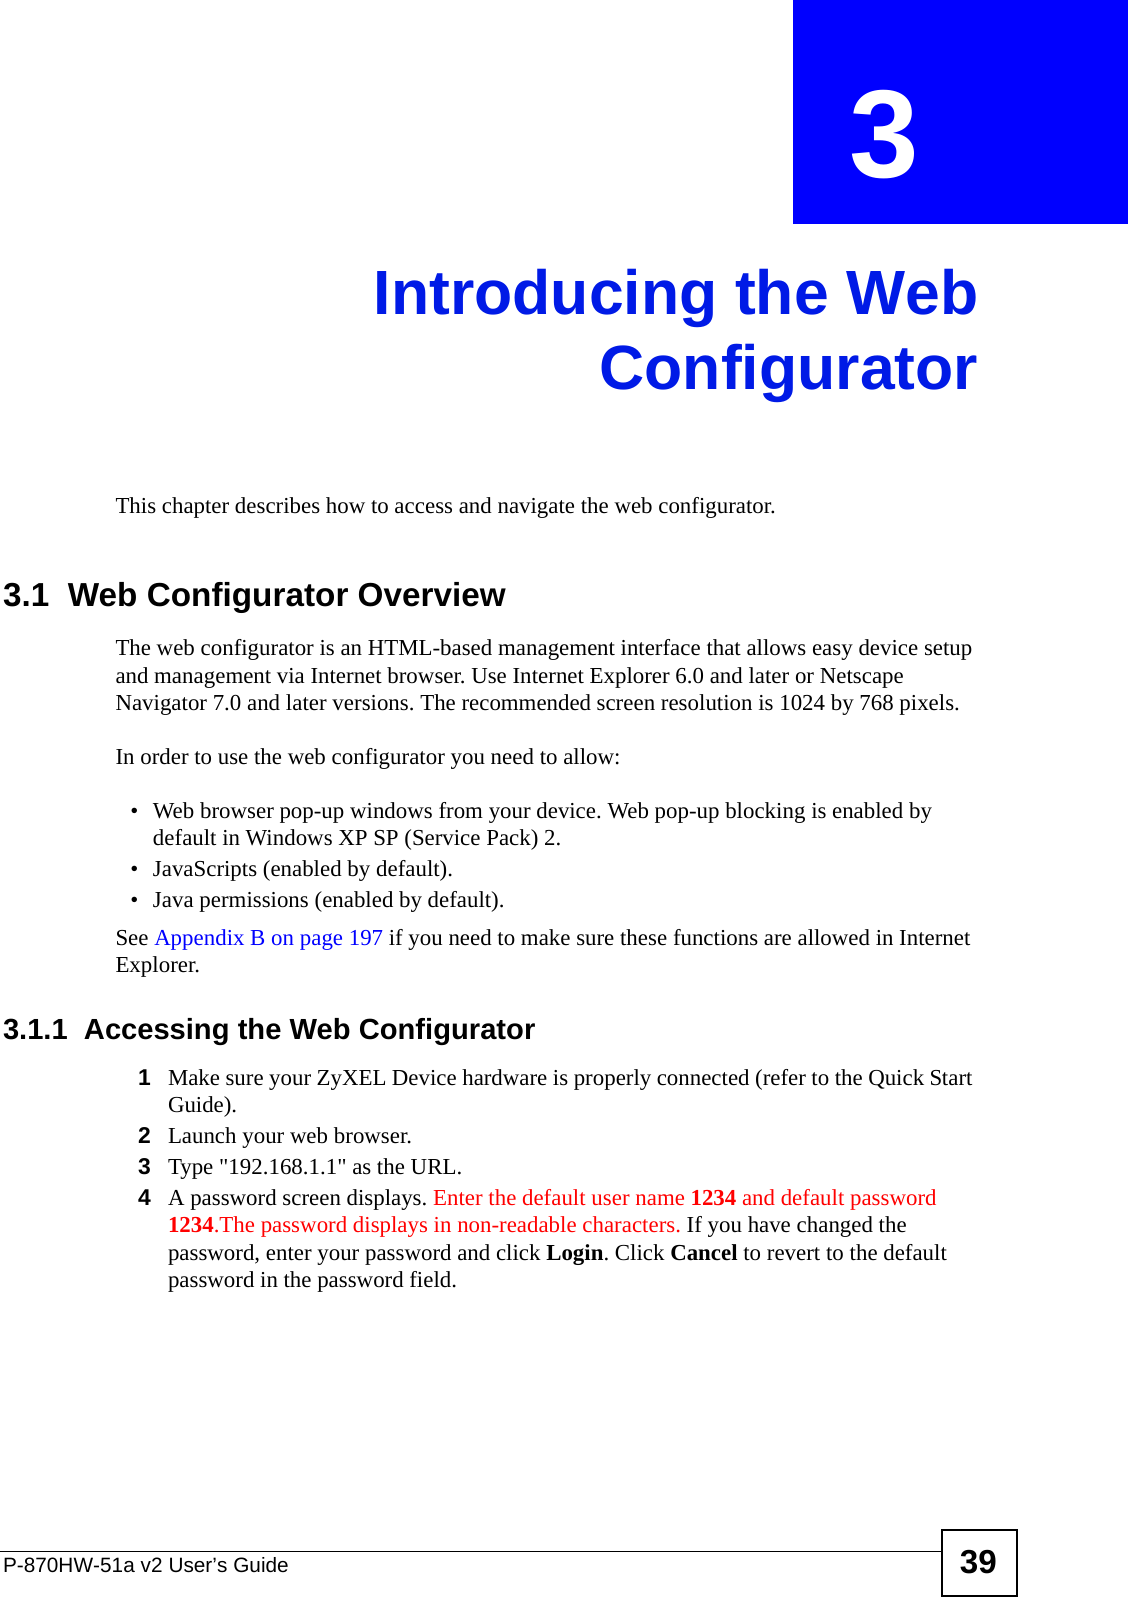 P-870HW-51a v2 User’s Guide 39CHAPTER  3 Introducing the WebConfiguratorThis chapter describes how to access and navigate the web configurator.3.1  Web Configurator OverviewThe web configurator is an HTML-based management interface that allows easy device setup and management via Internet browser. Use Internet Explorer 6.0 and later or Netscape Navigator 7.0 and later versions. The recommended screen resolution is 1024 by 768 pixels.In order to use the web configurator you need to allow:• Web browser pop-up windows from your device. Web pop-up blocking is enabled by default in Windows XP SP (Service Pack) 2.• JavaScripts (enabled by default).• Java permissions (enabled by default).See Appendix B on page 197 if you need to make sure these functions are allowed in Internet Explorer.3.1.1  Accessing the Web Configurator1Make sure your ZyXEL Device hardware is properly connected (refer to the Quick Start Guide).2Launch your web browser.3Type &quot;192.168.1.1&quot; as the URL.4A password screen displays. Enter the default user name 1234 and default password 1234.The password displays in non-readable characters. If you have changed the password, enter your password and click Login. Click Cancel to revert to the default password in the password field. 